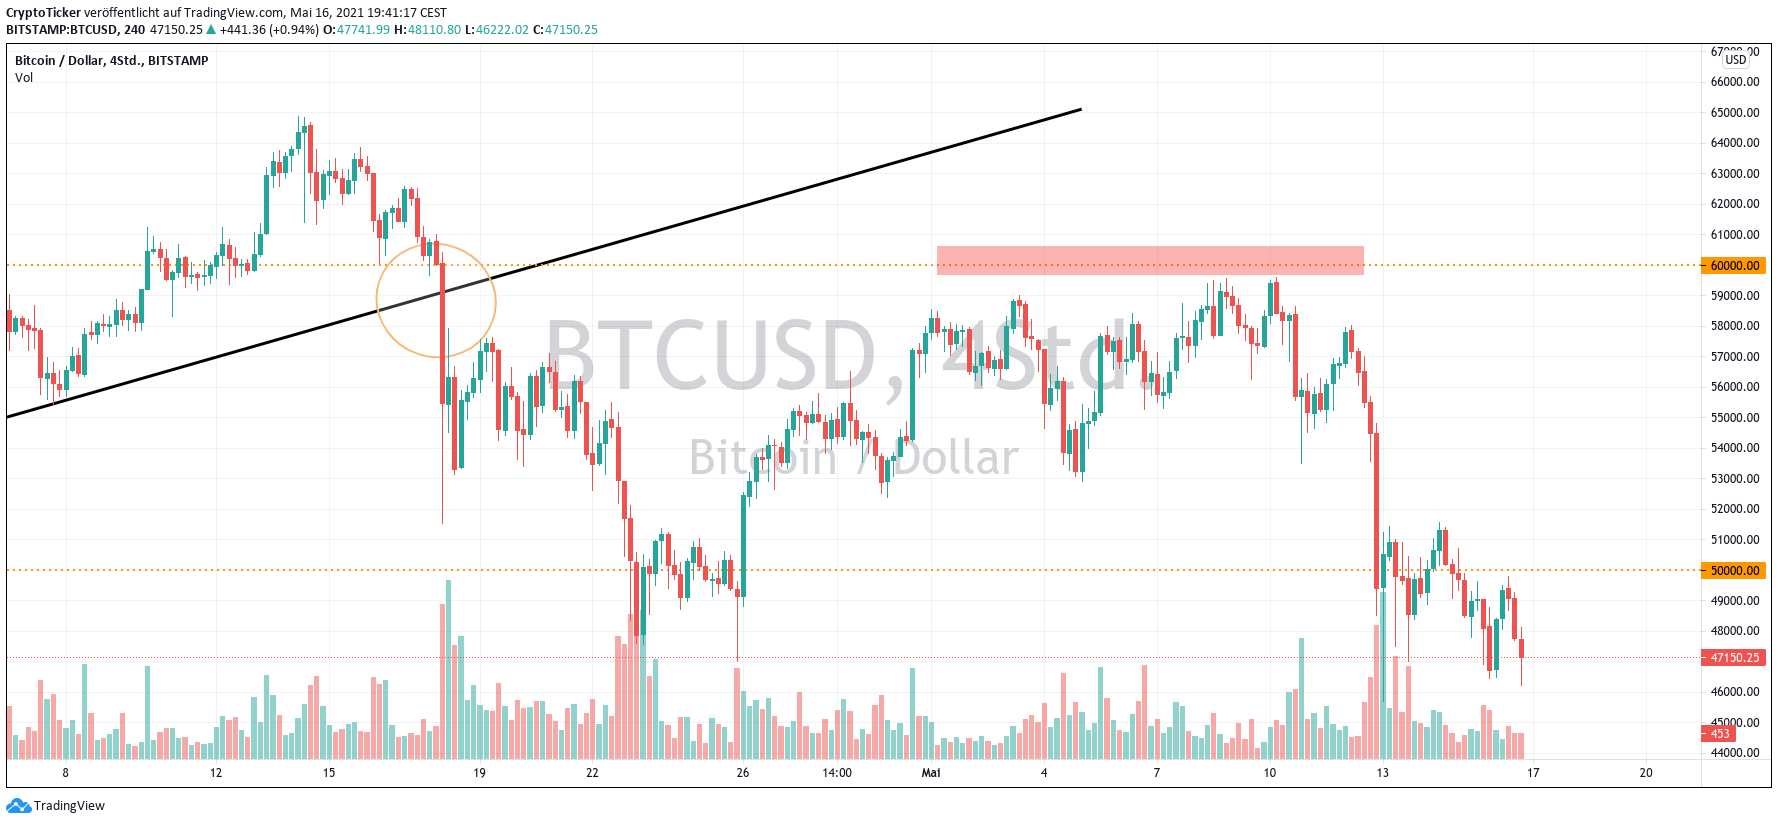 BTC/USD 4-hours chart showing a break in the uptrend of Bitcoin Price